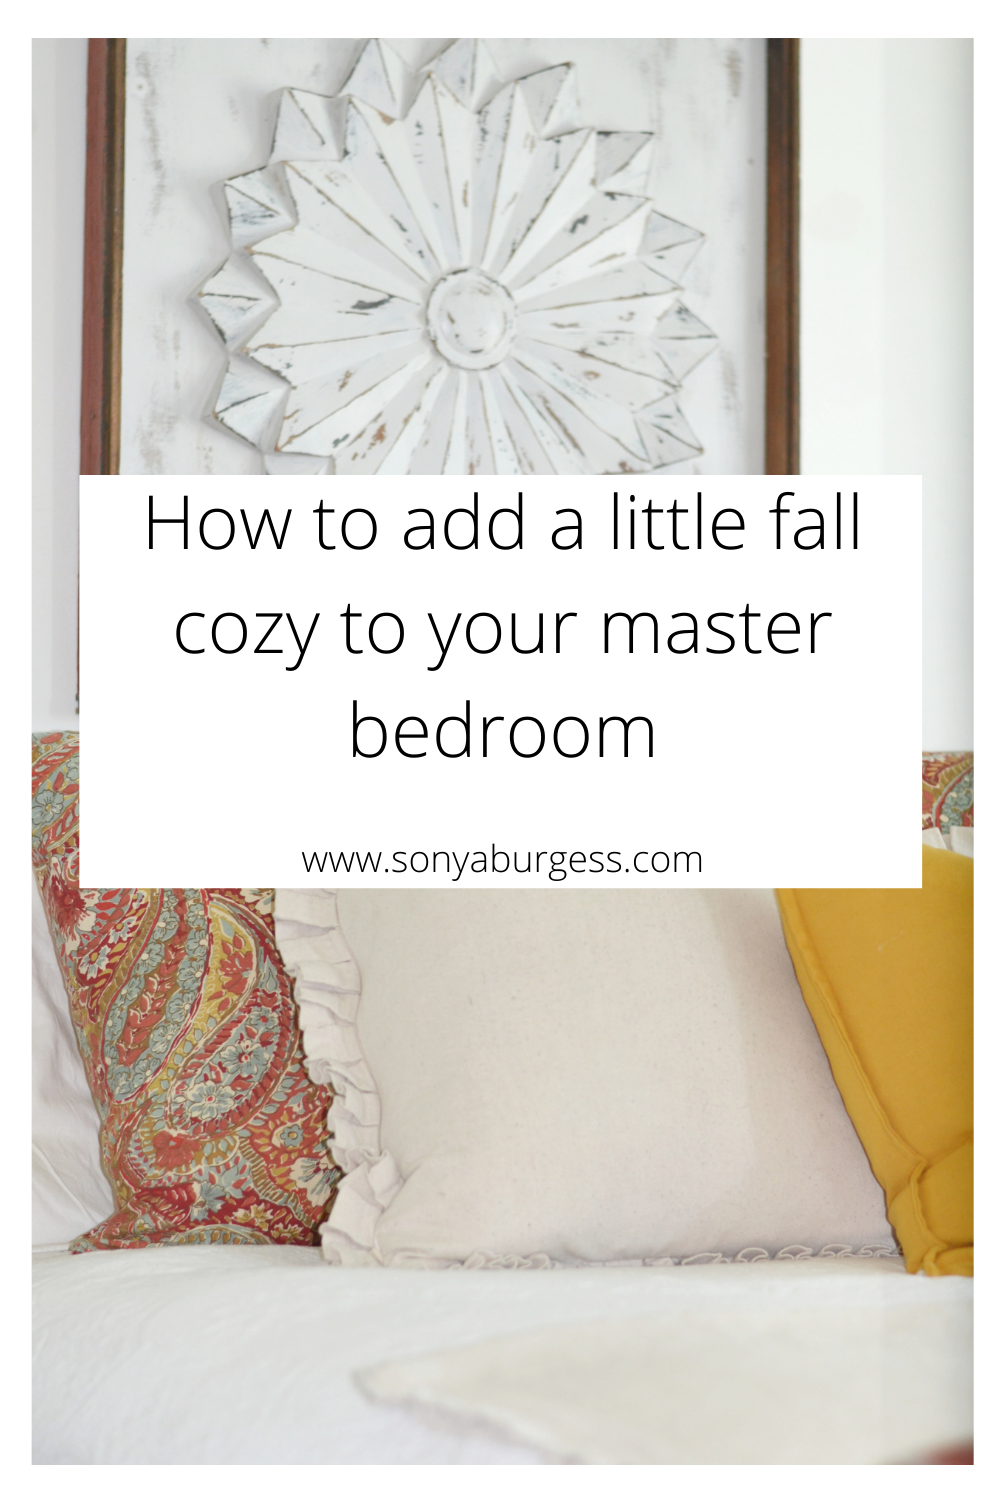 How to add a little fall cozy to your master bedroom